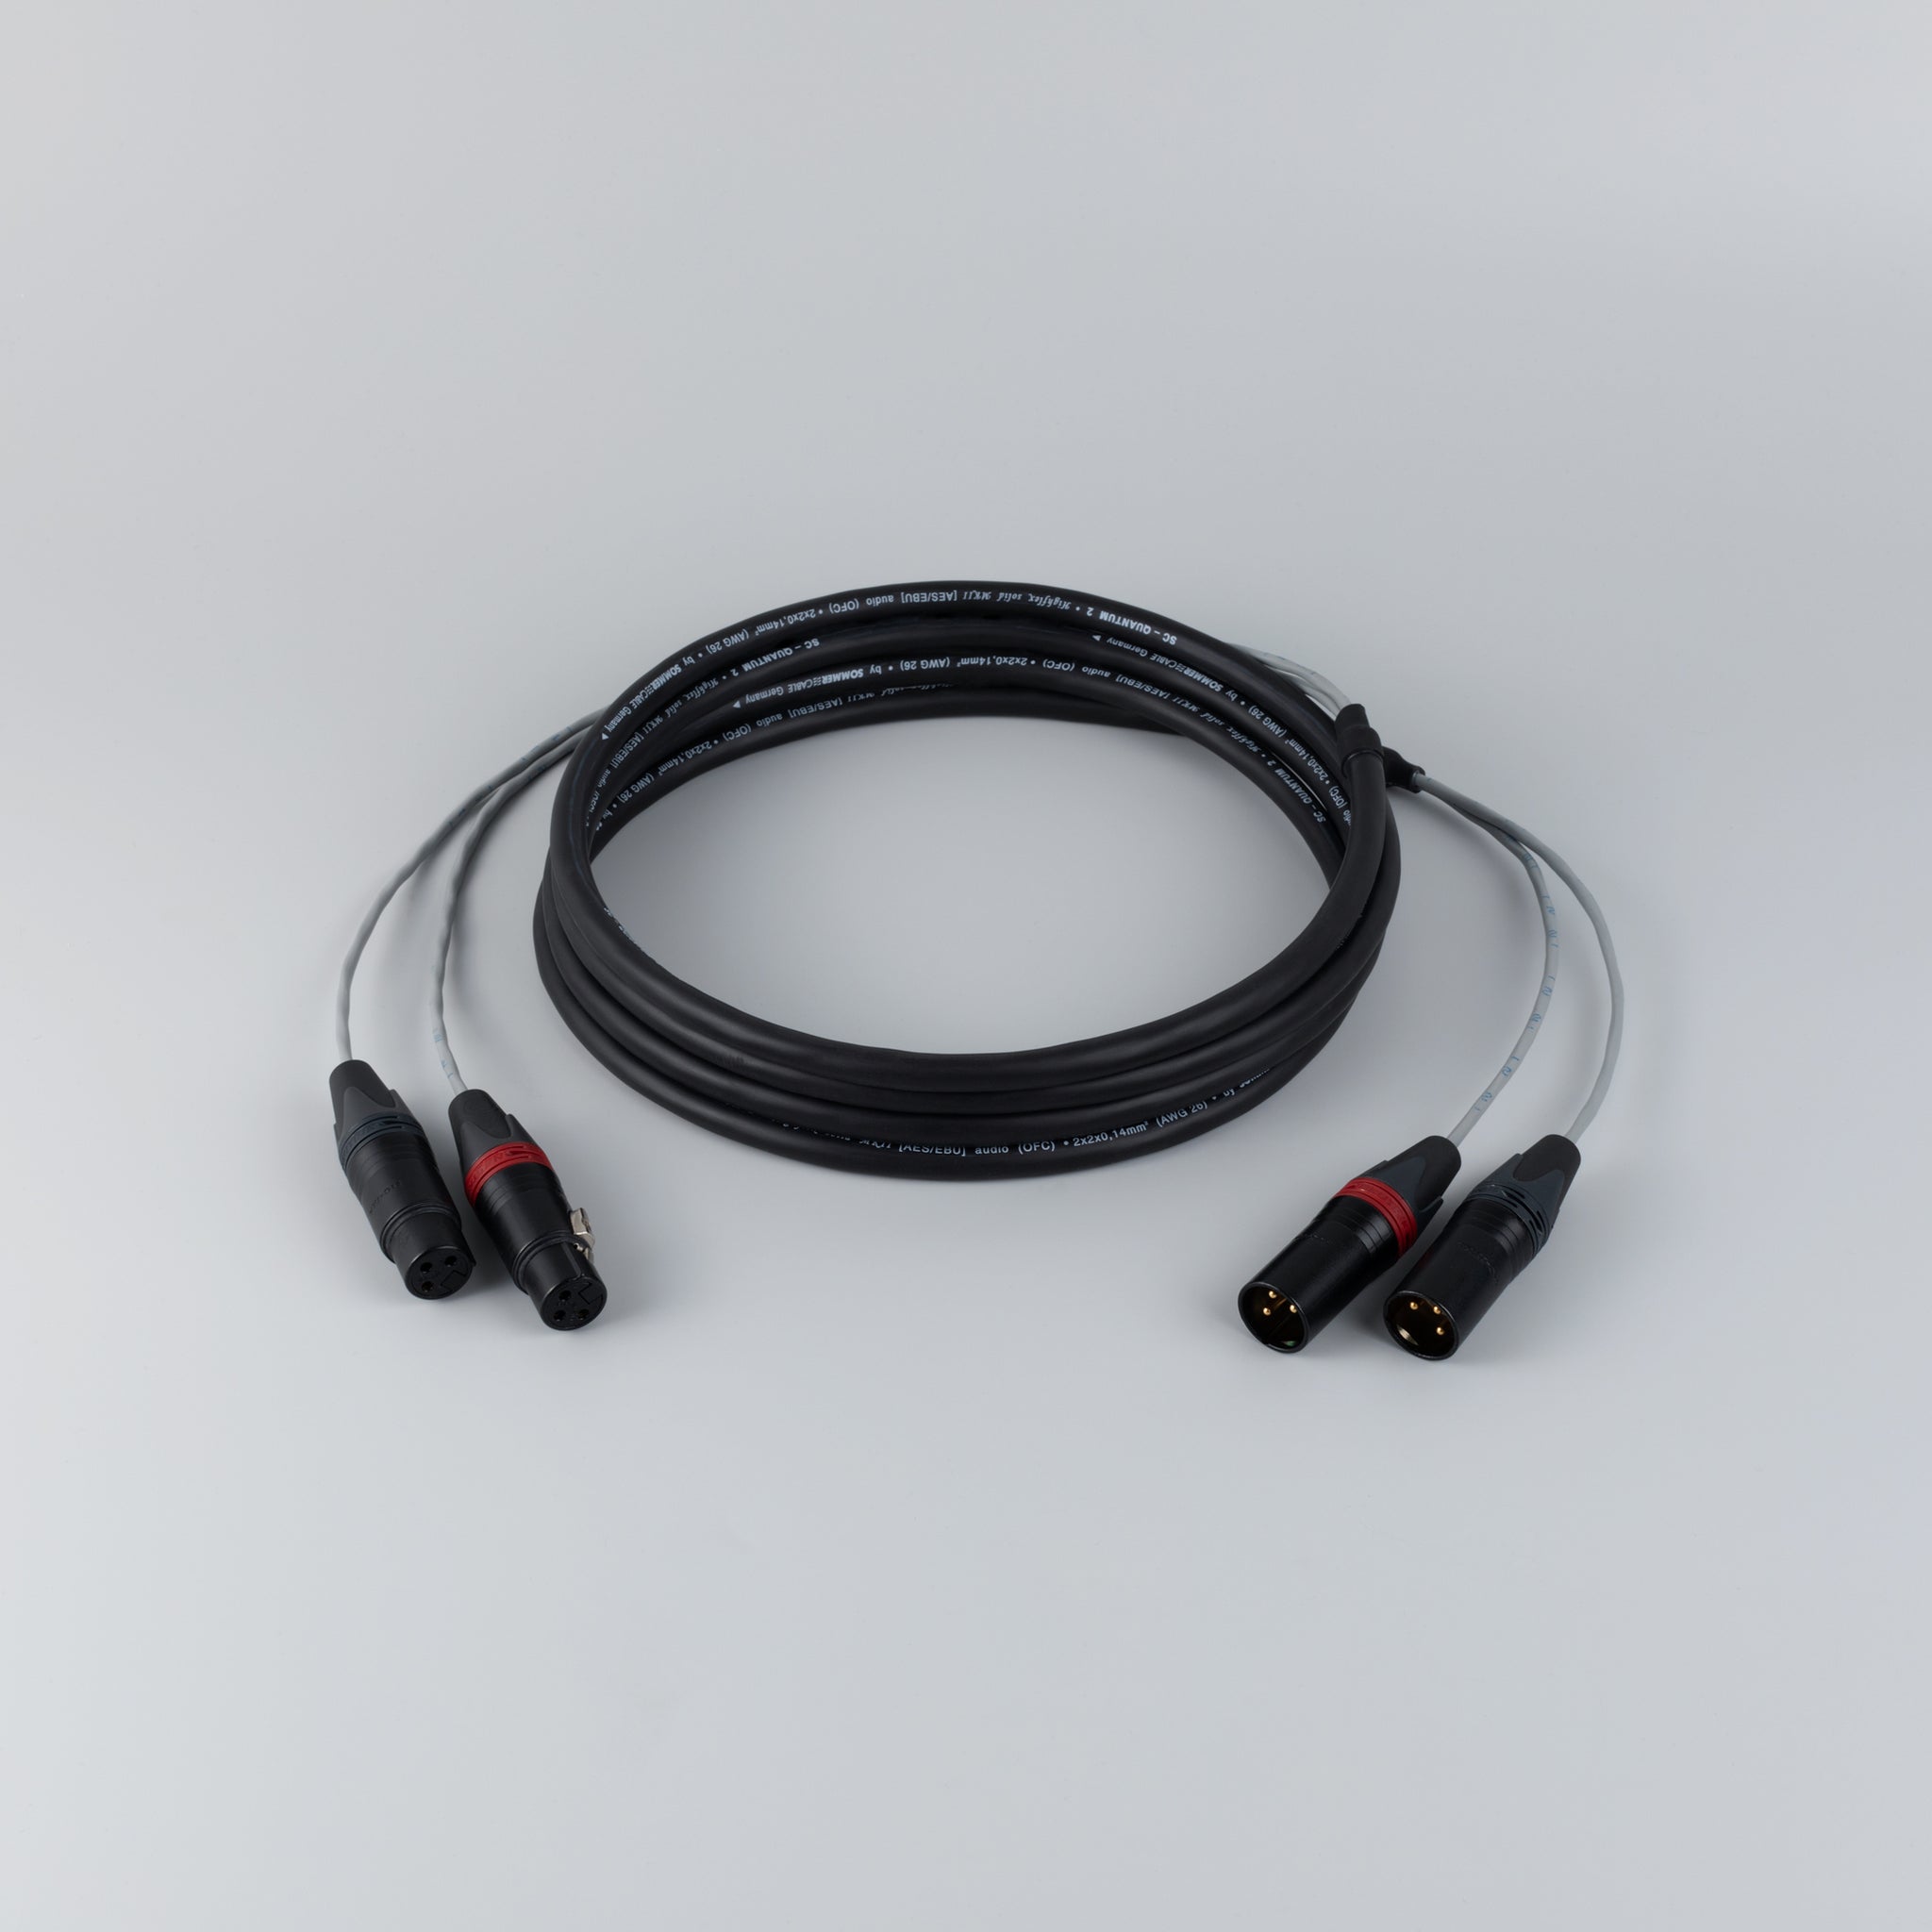 Stereo XLR cable